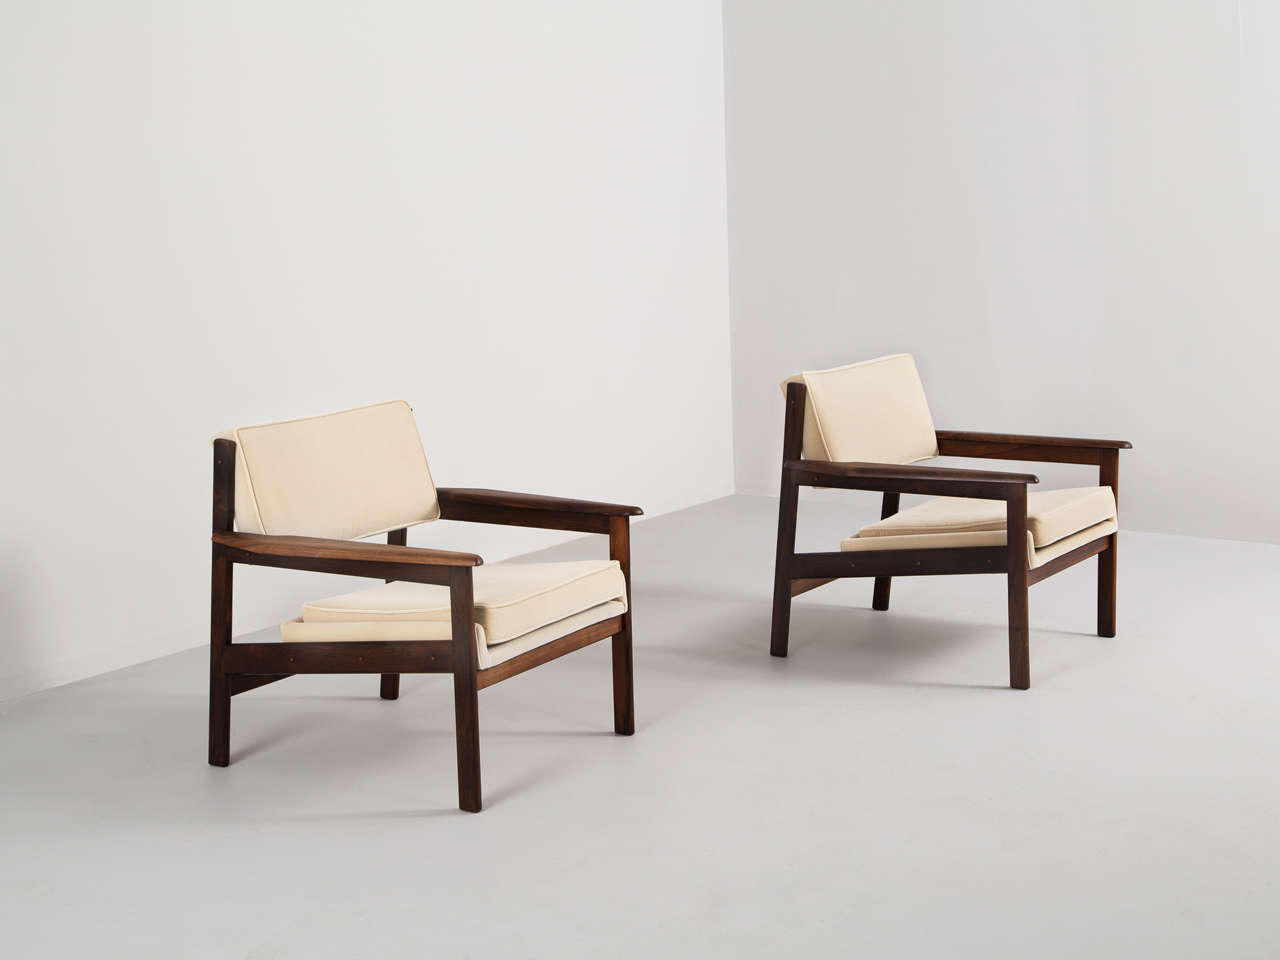 Very rare pare of 'Drummond' lounge chairs by Sergio Rodrigues for OCA furniture Brazil.

The chair has been produced in 1959 by OCA in Brazil from solid Jacaranda wood which is very rare to find nowadays. This kind of wood has a wonderfull grain